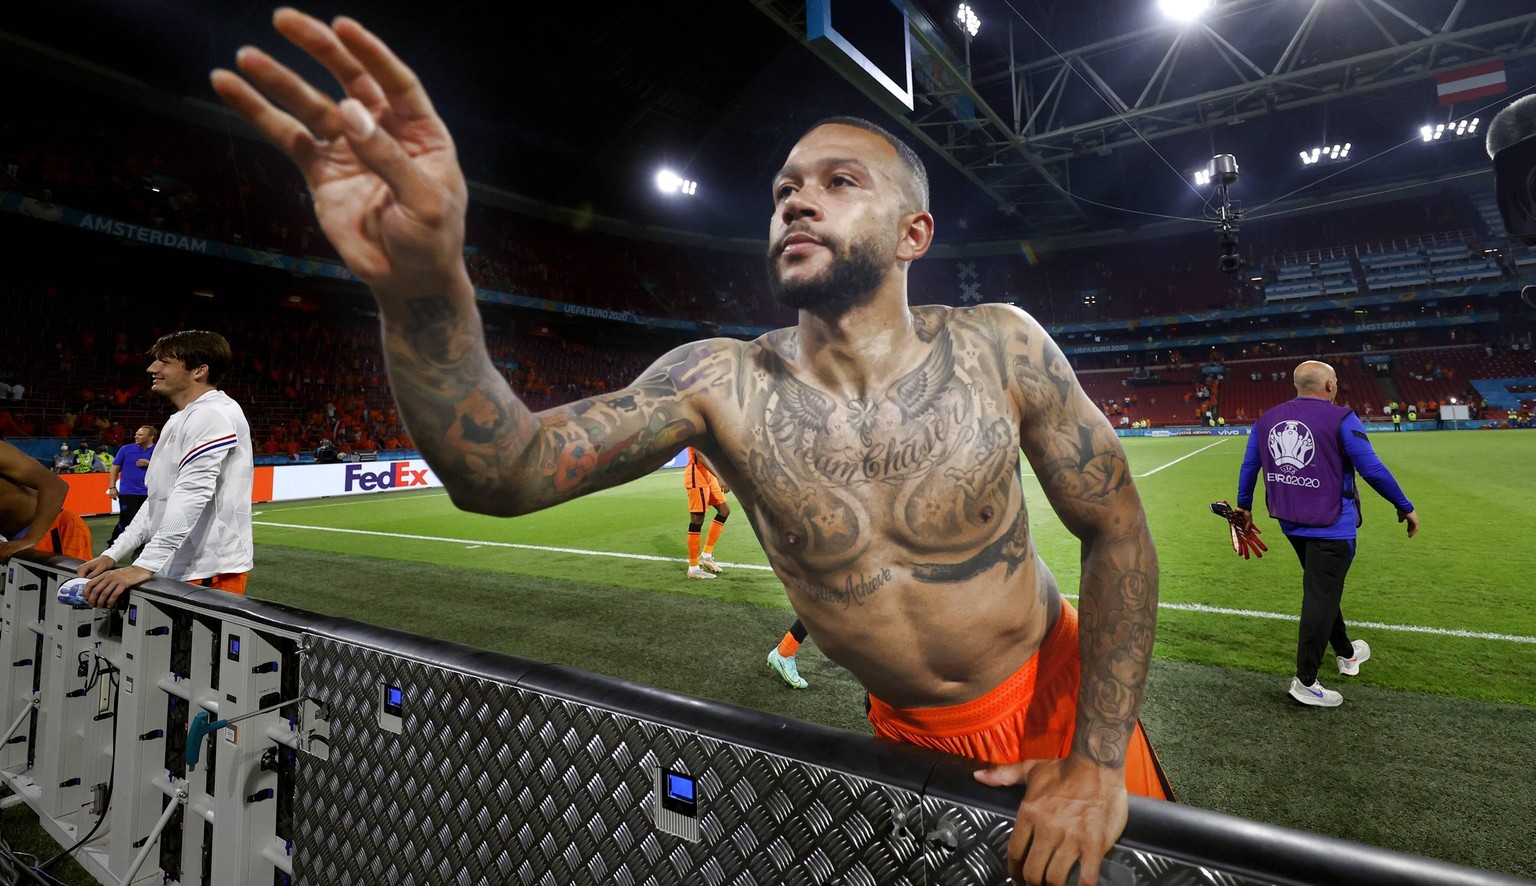 AMSTERDAM, 17-06-2021 JohanCruyff Arena, Group stage of EURO2020 between Netherlands and Austria 2-0. Netherlands celebrate their win. Memphis Depay gives away his shirt. Netherlands - Austria PUBLICA ...